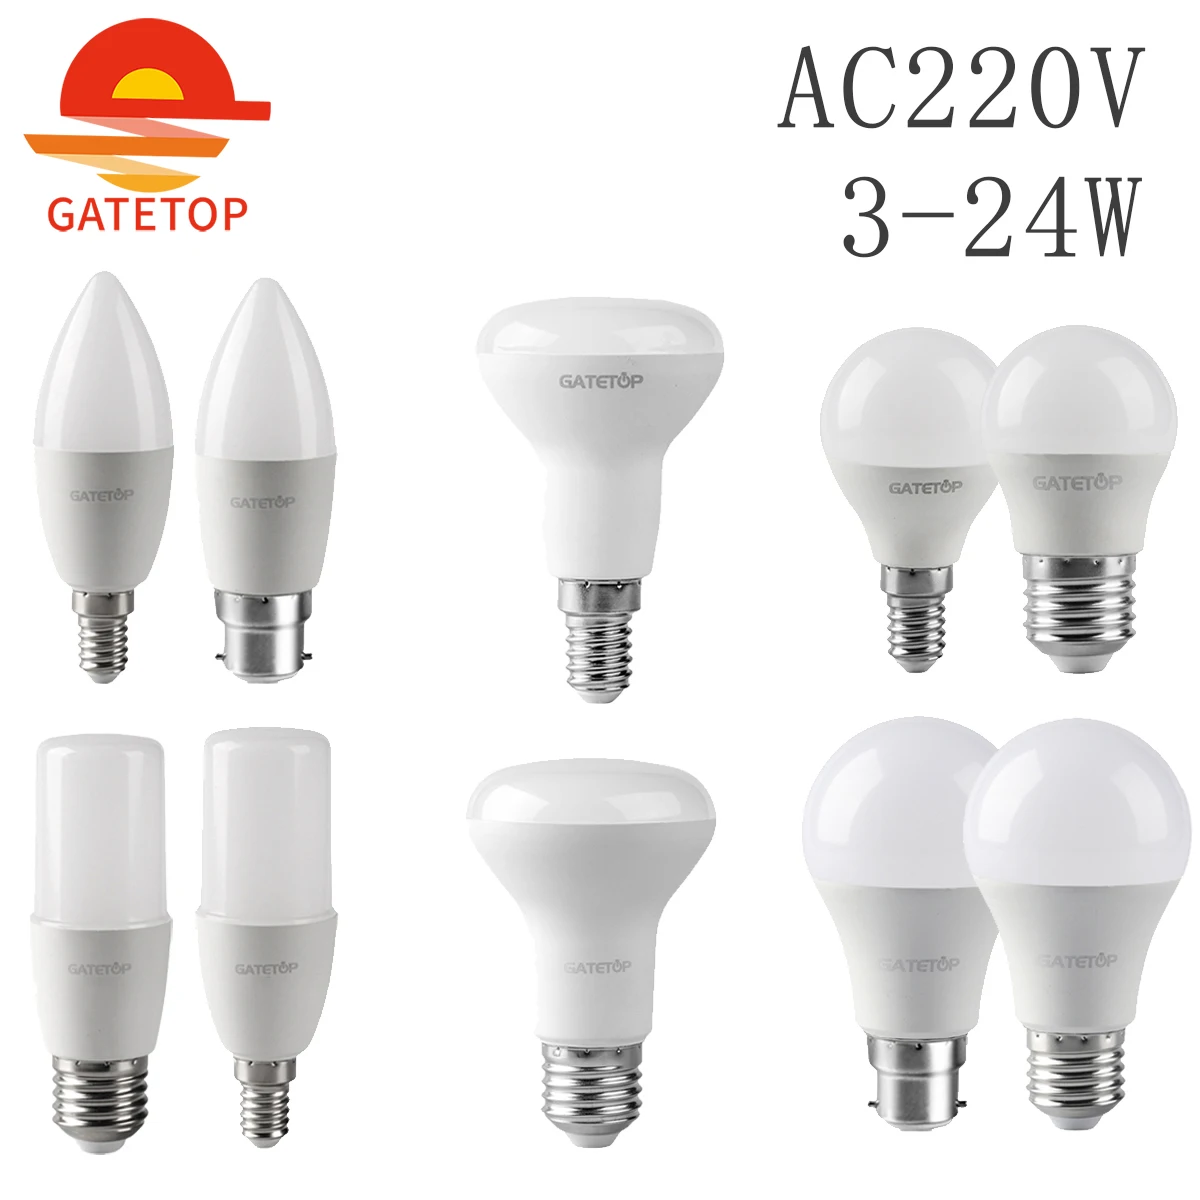 

LED Energy Saving Bulb AC220V E27 B22 E14 3w-24w 3000K 4000K 6000K Lamp With Ce Rohs For Home Office Interior Decoration